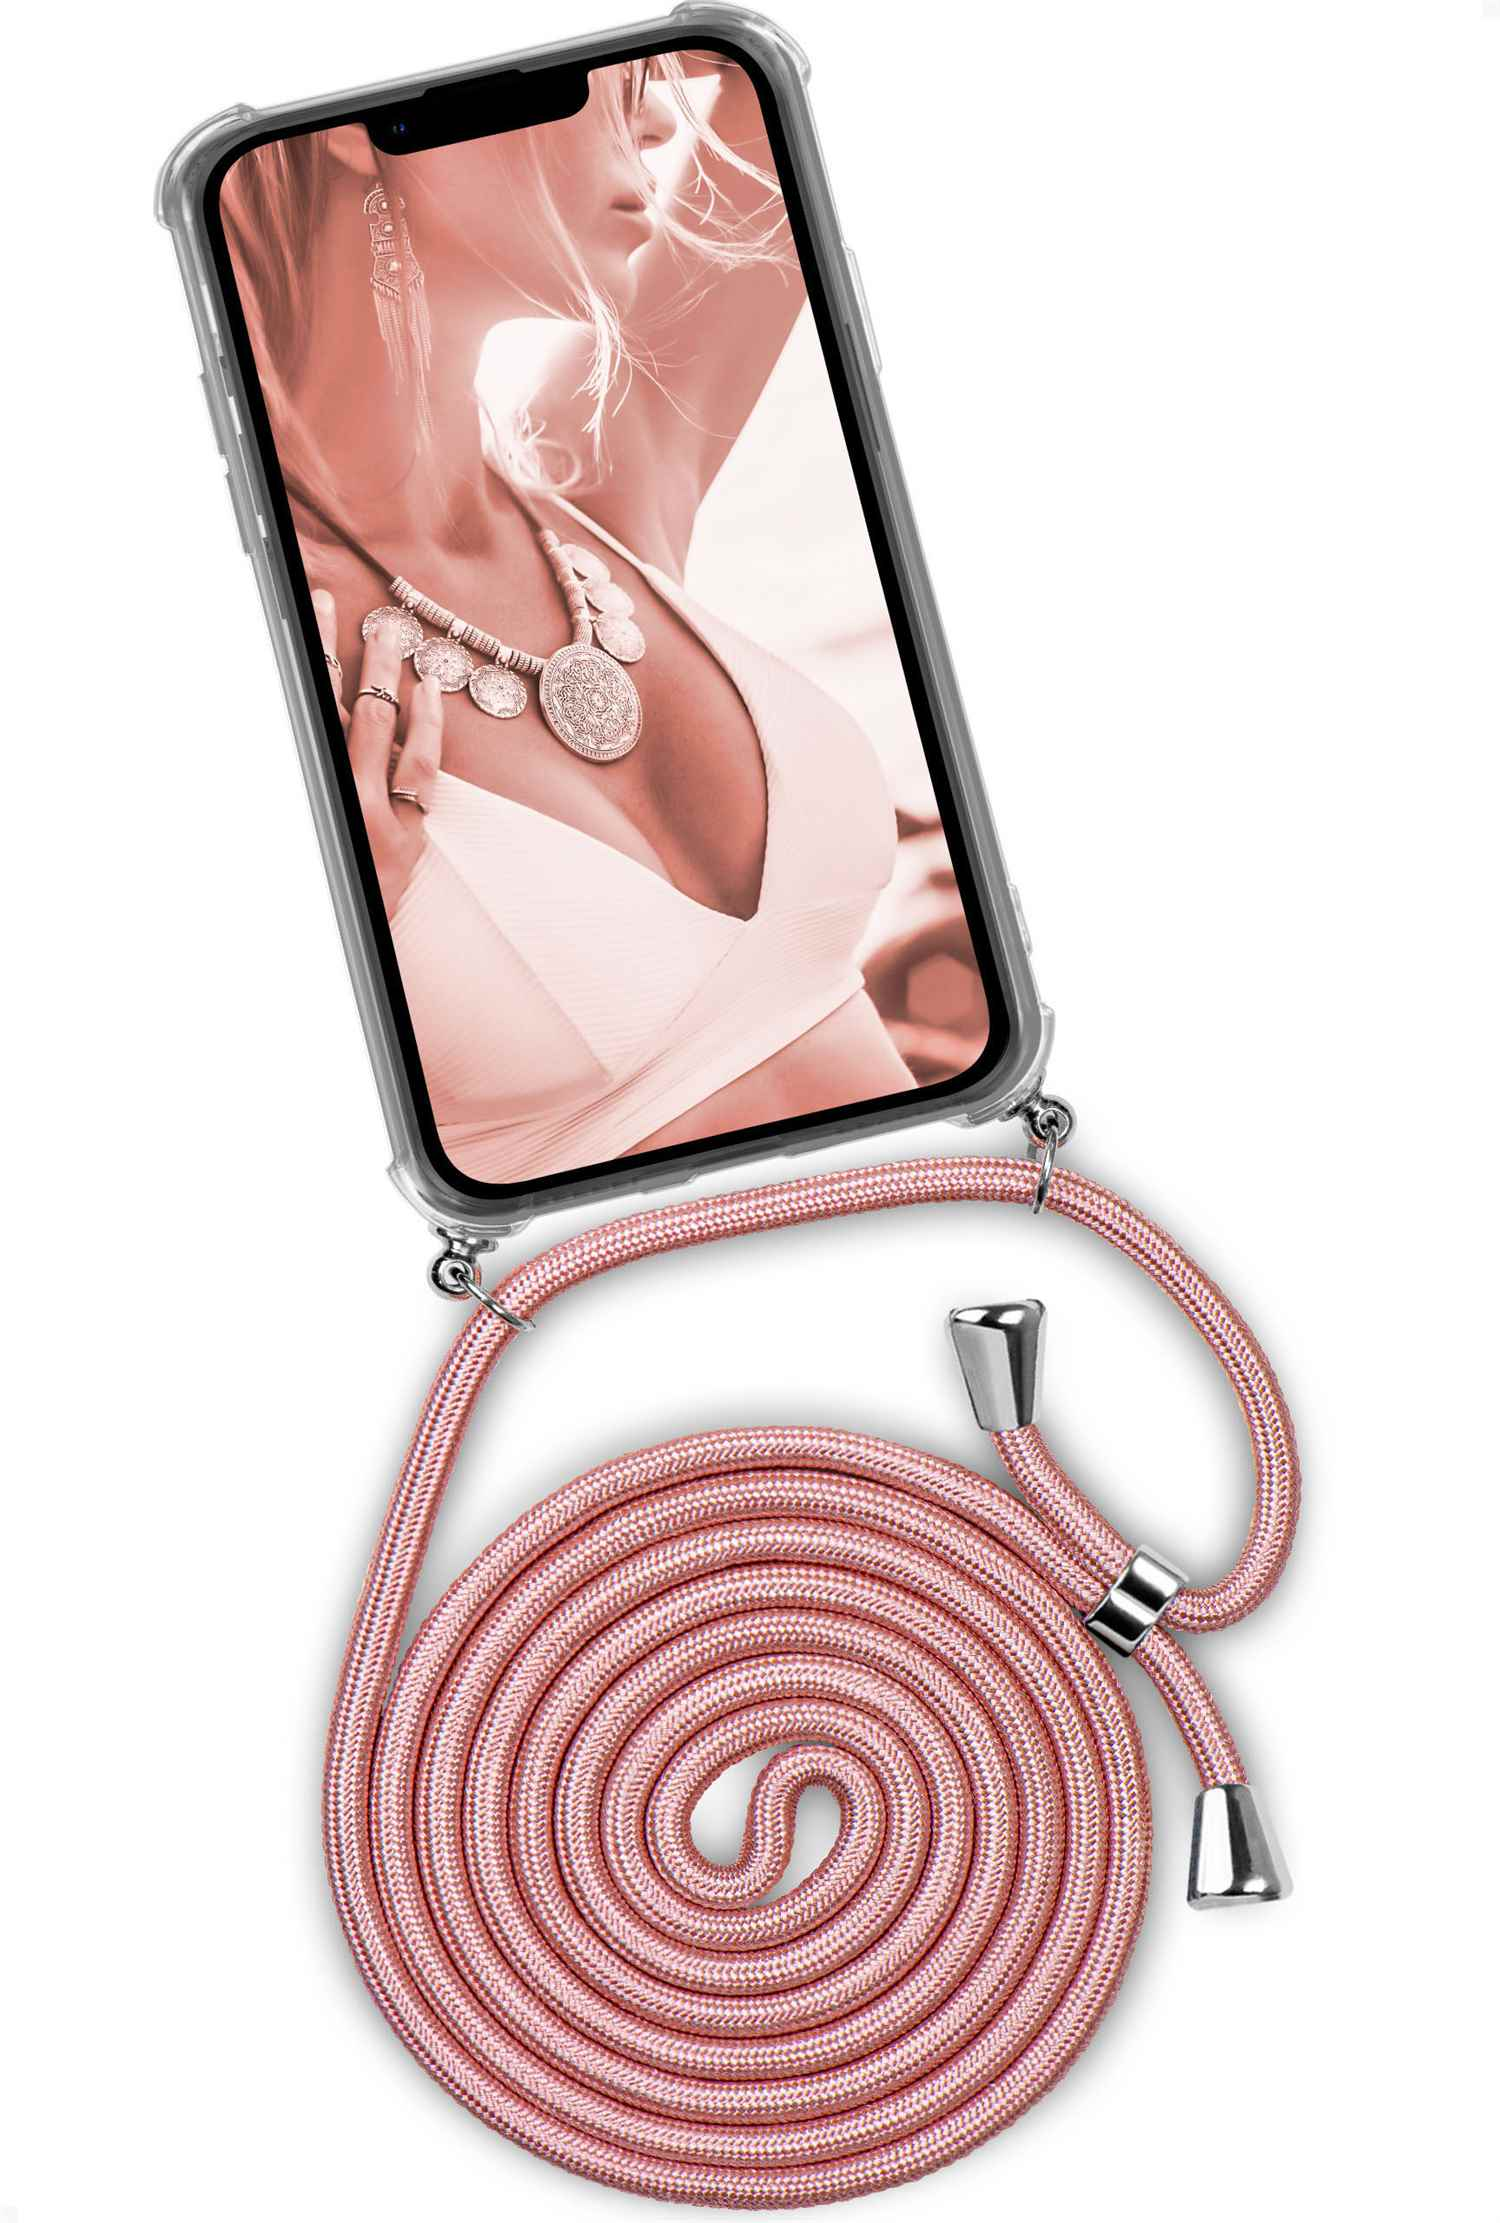 Twist 13, Apple, Backcover, iPhone ONEFLOW (Silber) Case, Shiny Blush